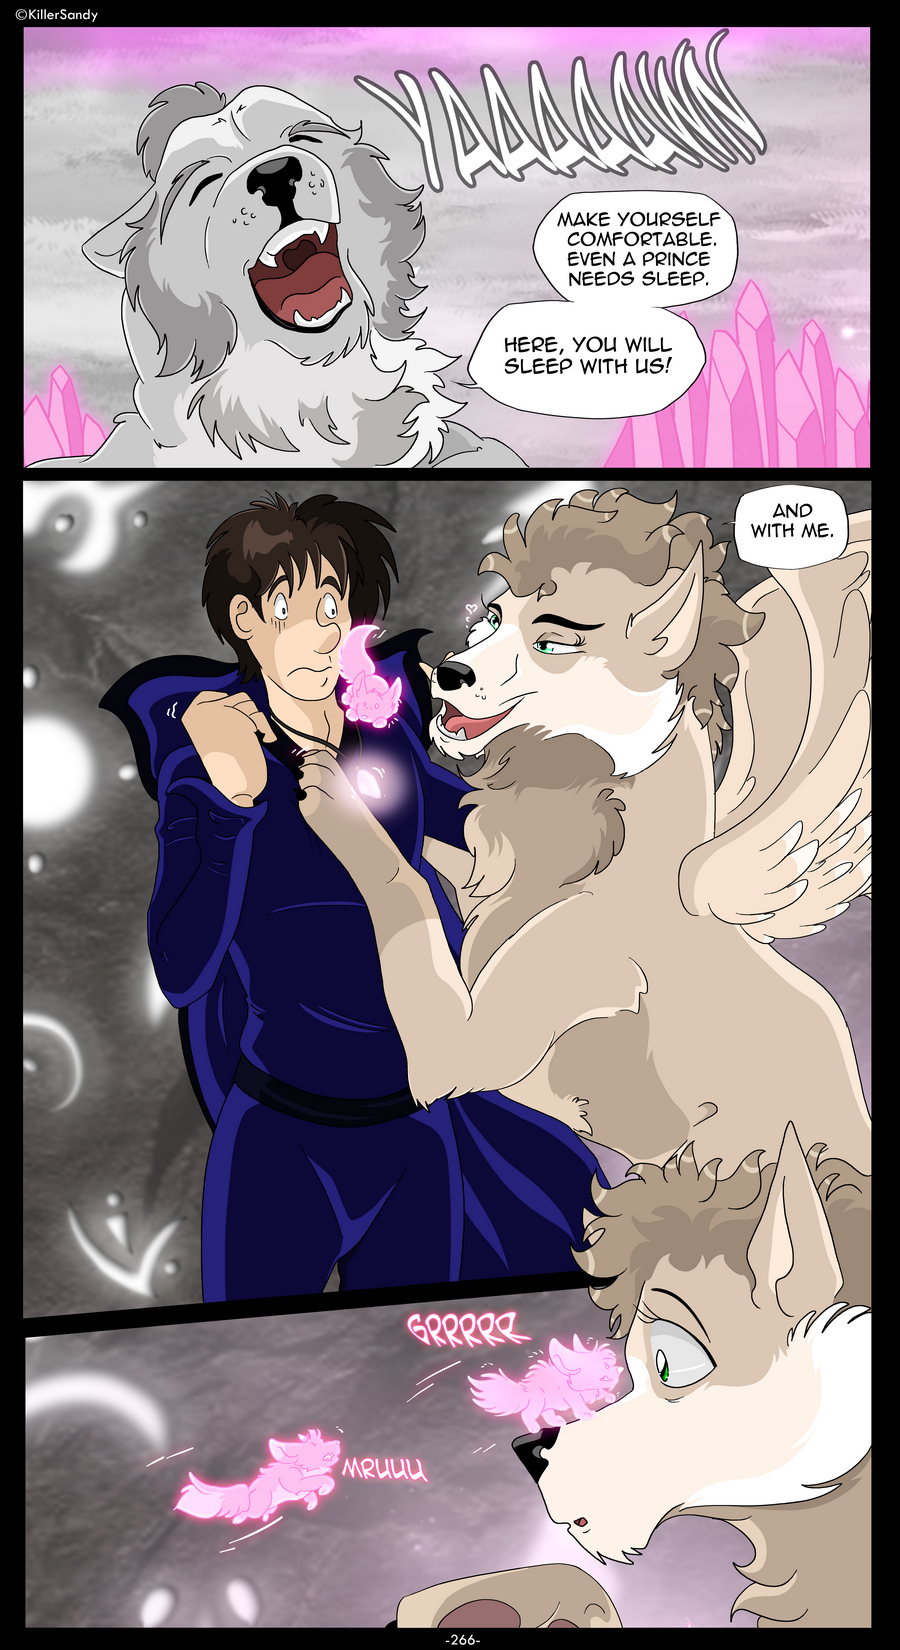 The Prince of the Moonlight Stone page 266